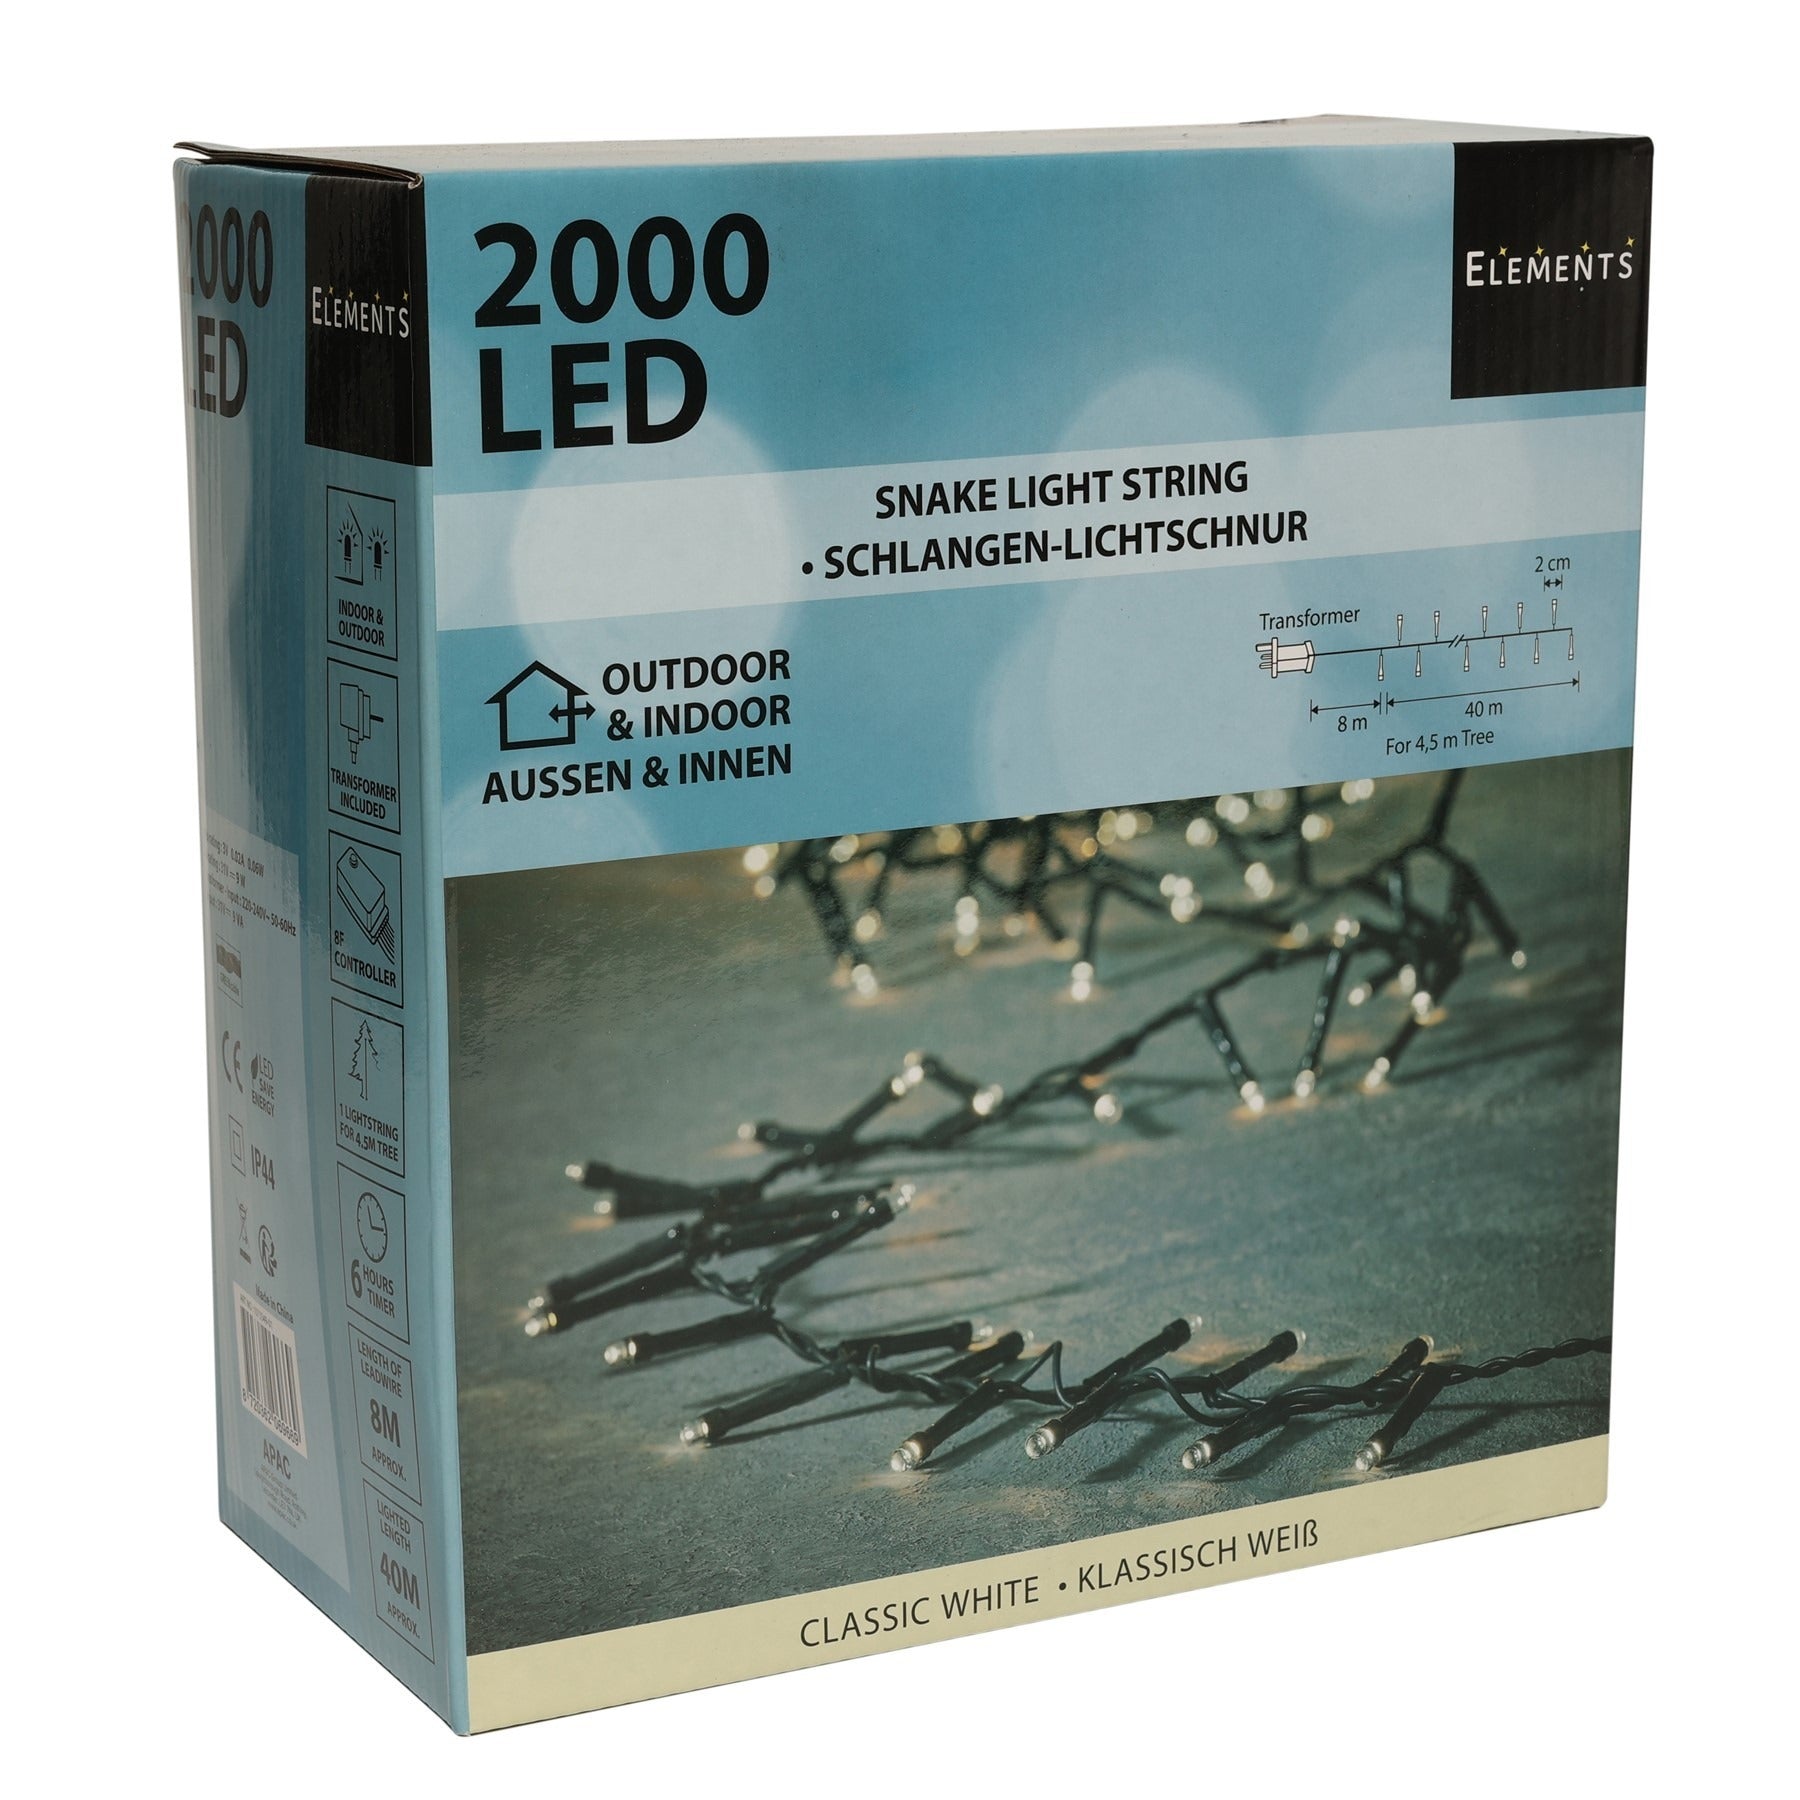 View Classic White Elements Snake Mains lights 4000cm information